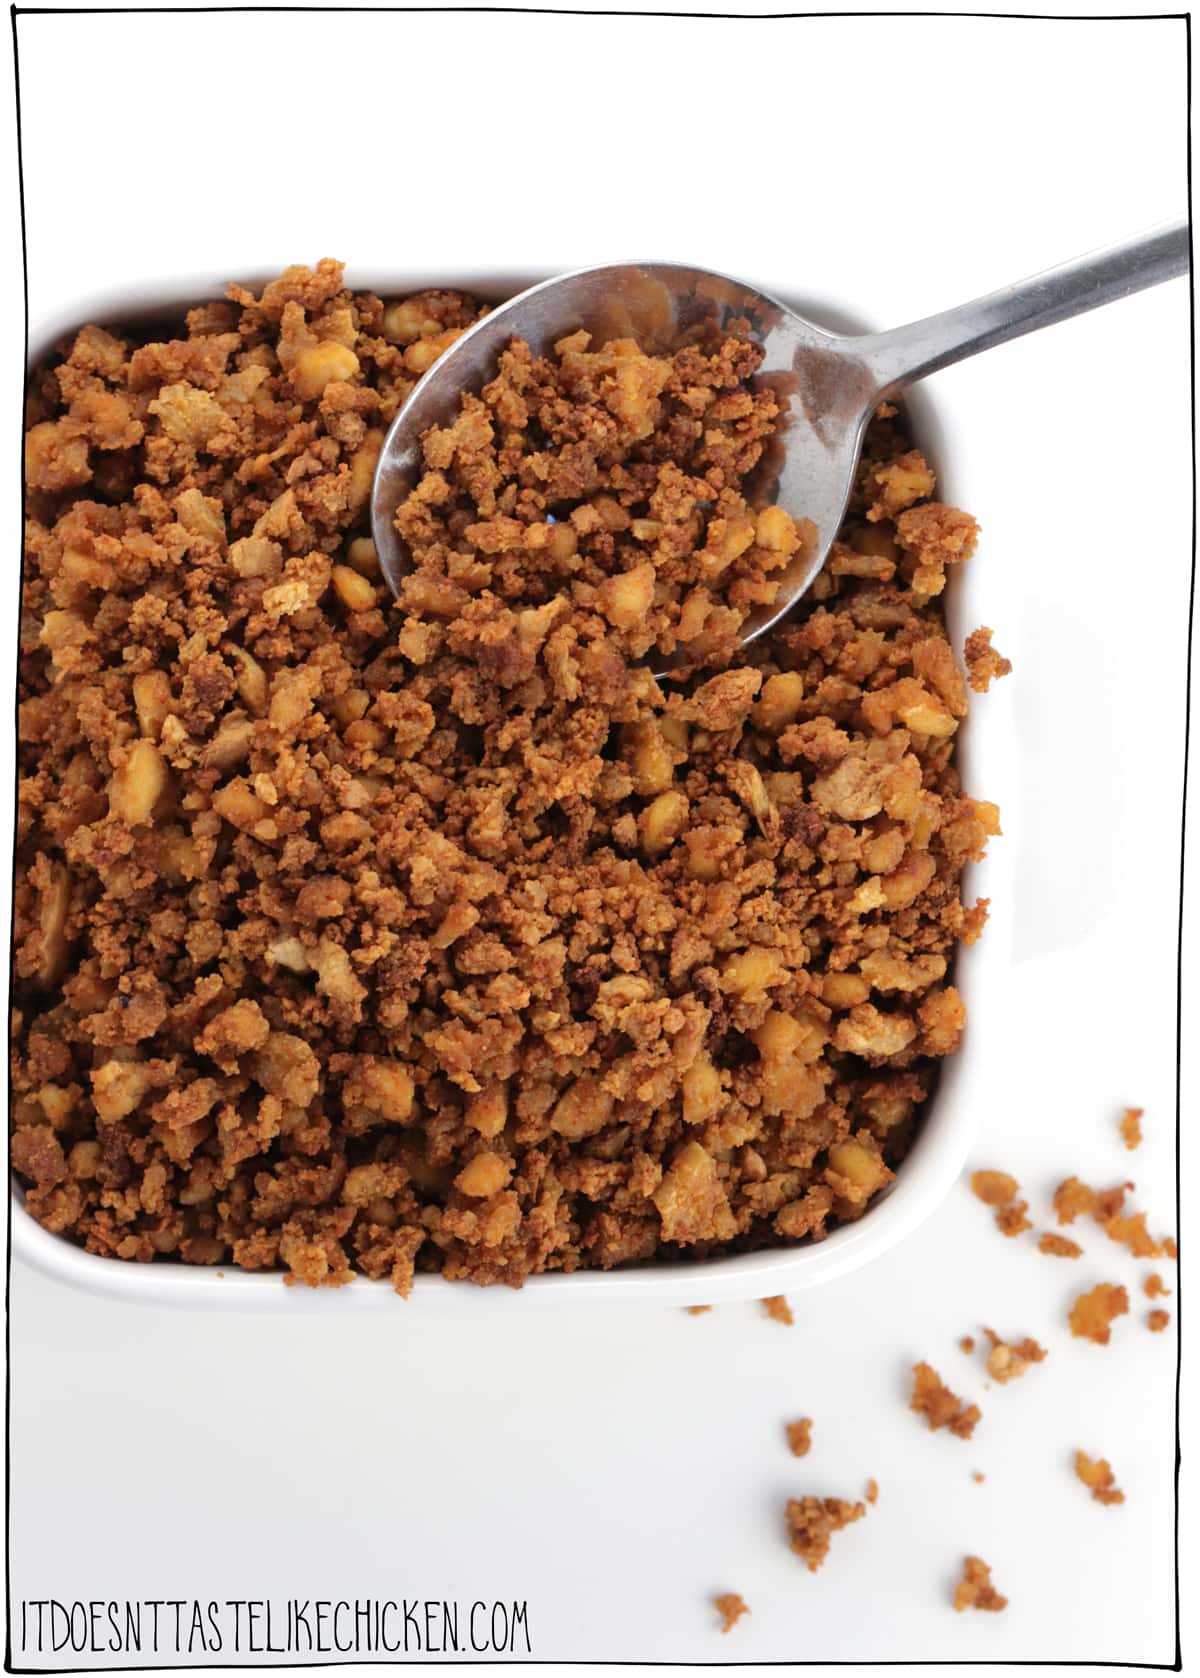 Vegan Tofu Bacon Bits! Easy to make with just 7 ingredients, oil-free, gluten-free, and are actually HEALTHY! Healthy bacon? I like the sounds of that! Sprinkle them on salad, soup, pizza, pasta, anywhere you like! #itdoesnttastelikechicken #veganrecipes #veganbacon